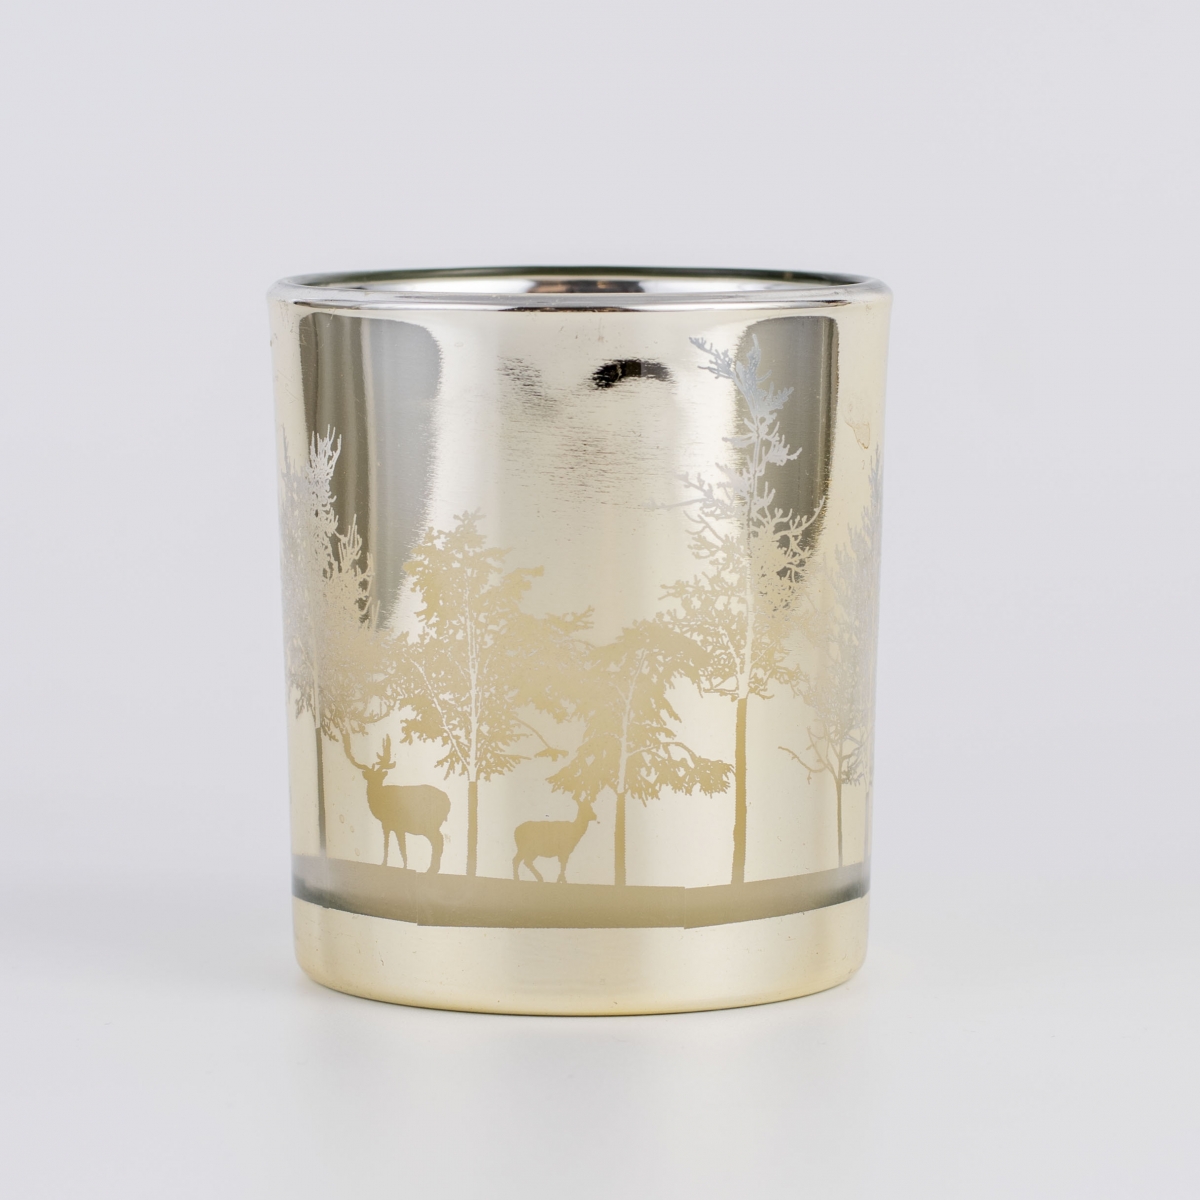 Scented Candles : Winter Forest, Deer ,Engraved Glass,Soy Candles,China Factory ,Good Price-HOWCANDLE-Candles,Scented Candles,Aromatherapy Candles,Soy Candles,Vegan Candles,Jar Candles,Pillar Candles,Candle Gift Sets,Essential Oils,Reed Diffuser,Candle Holder,